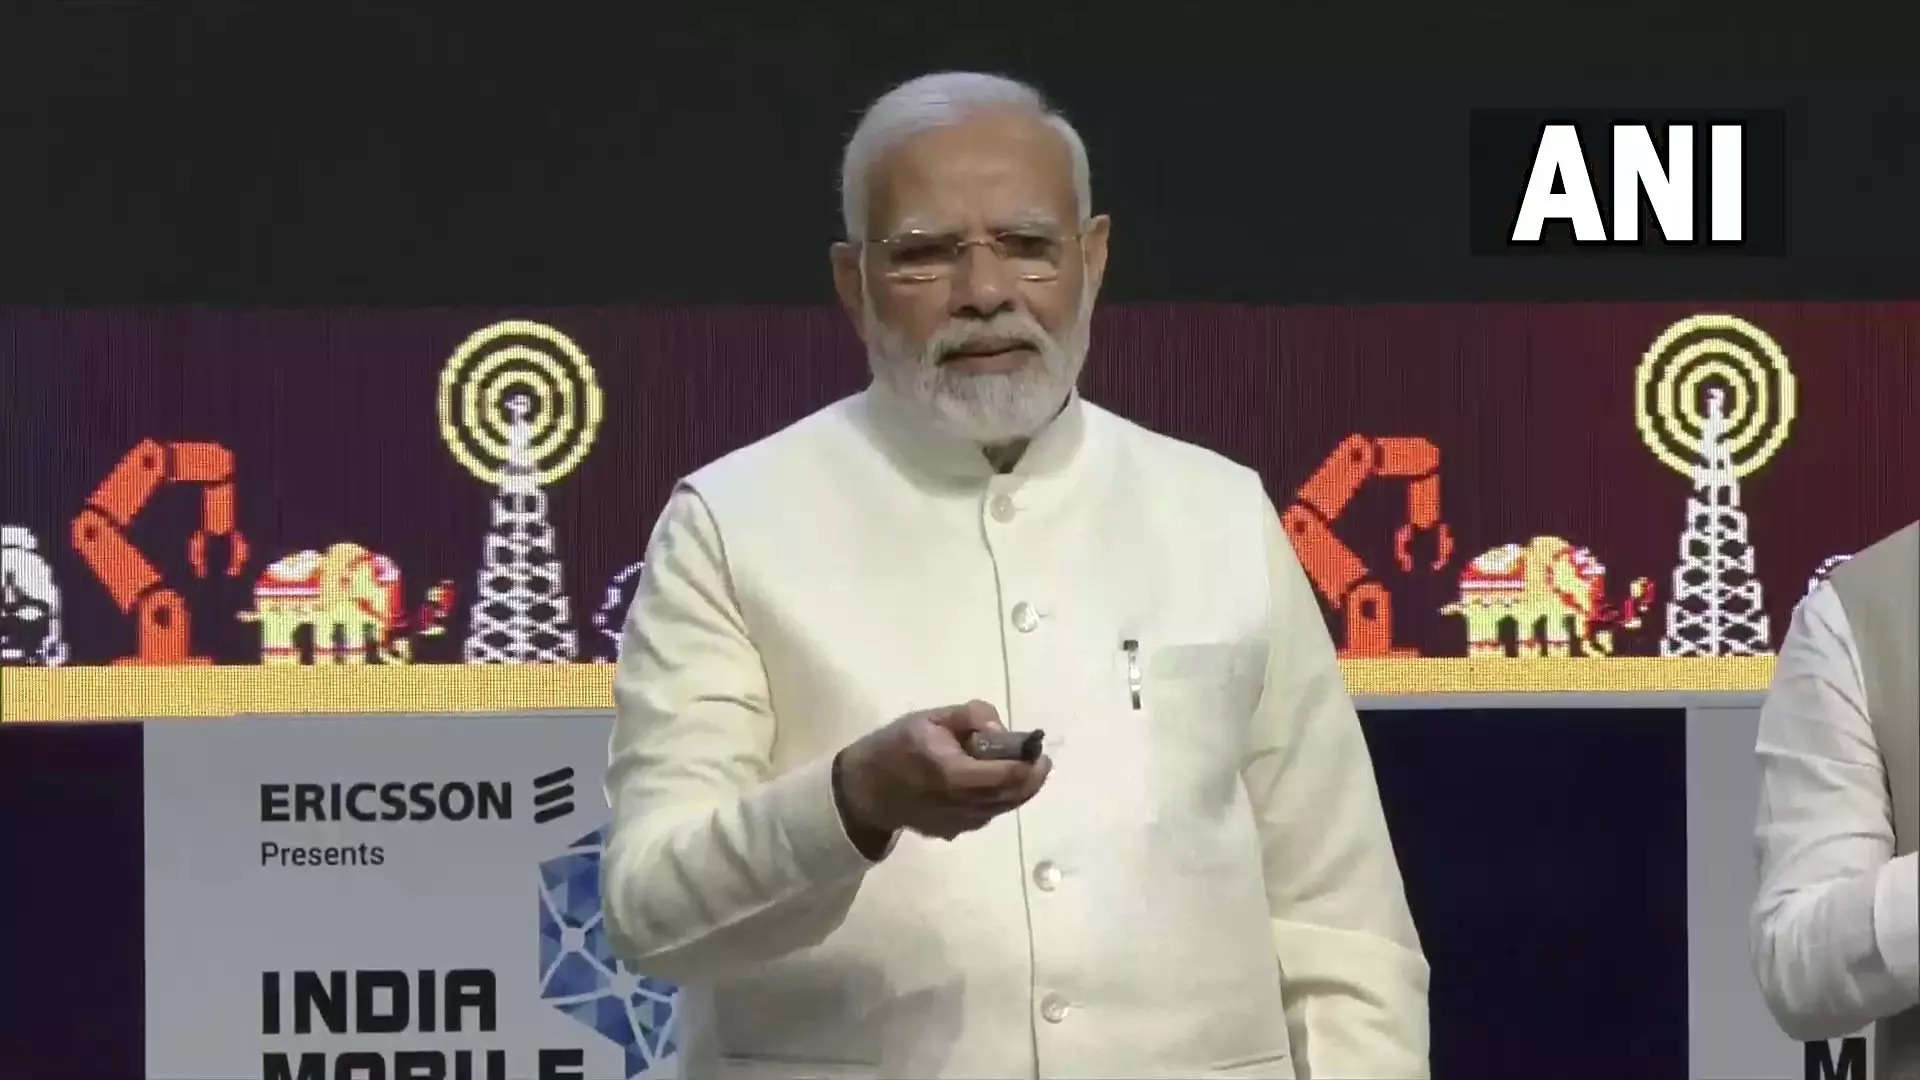 ​PM Modi launched 5G services in India at the 6th edition of the Indian Mobile Congress